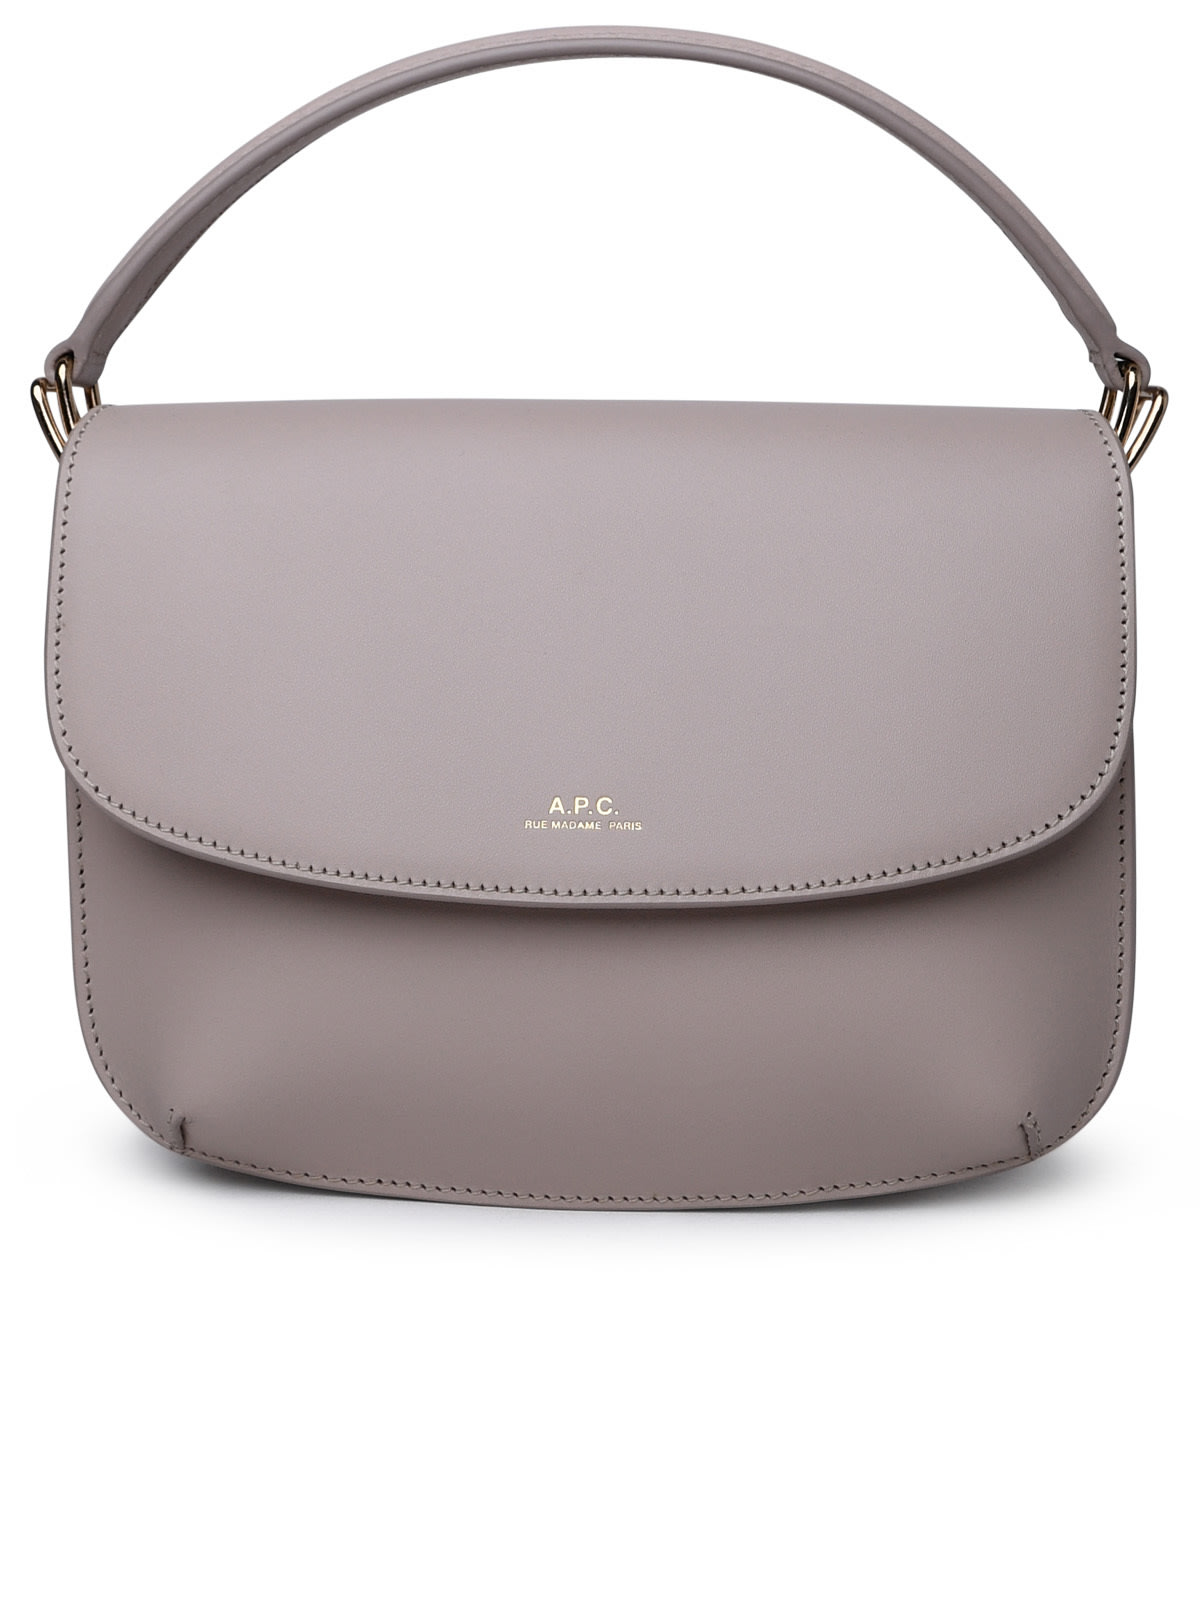 A.P.C. Dove Grey Leather Bag